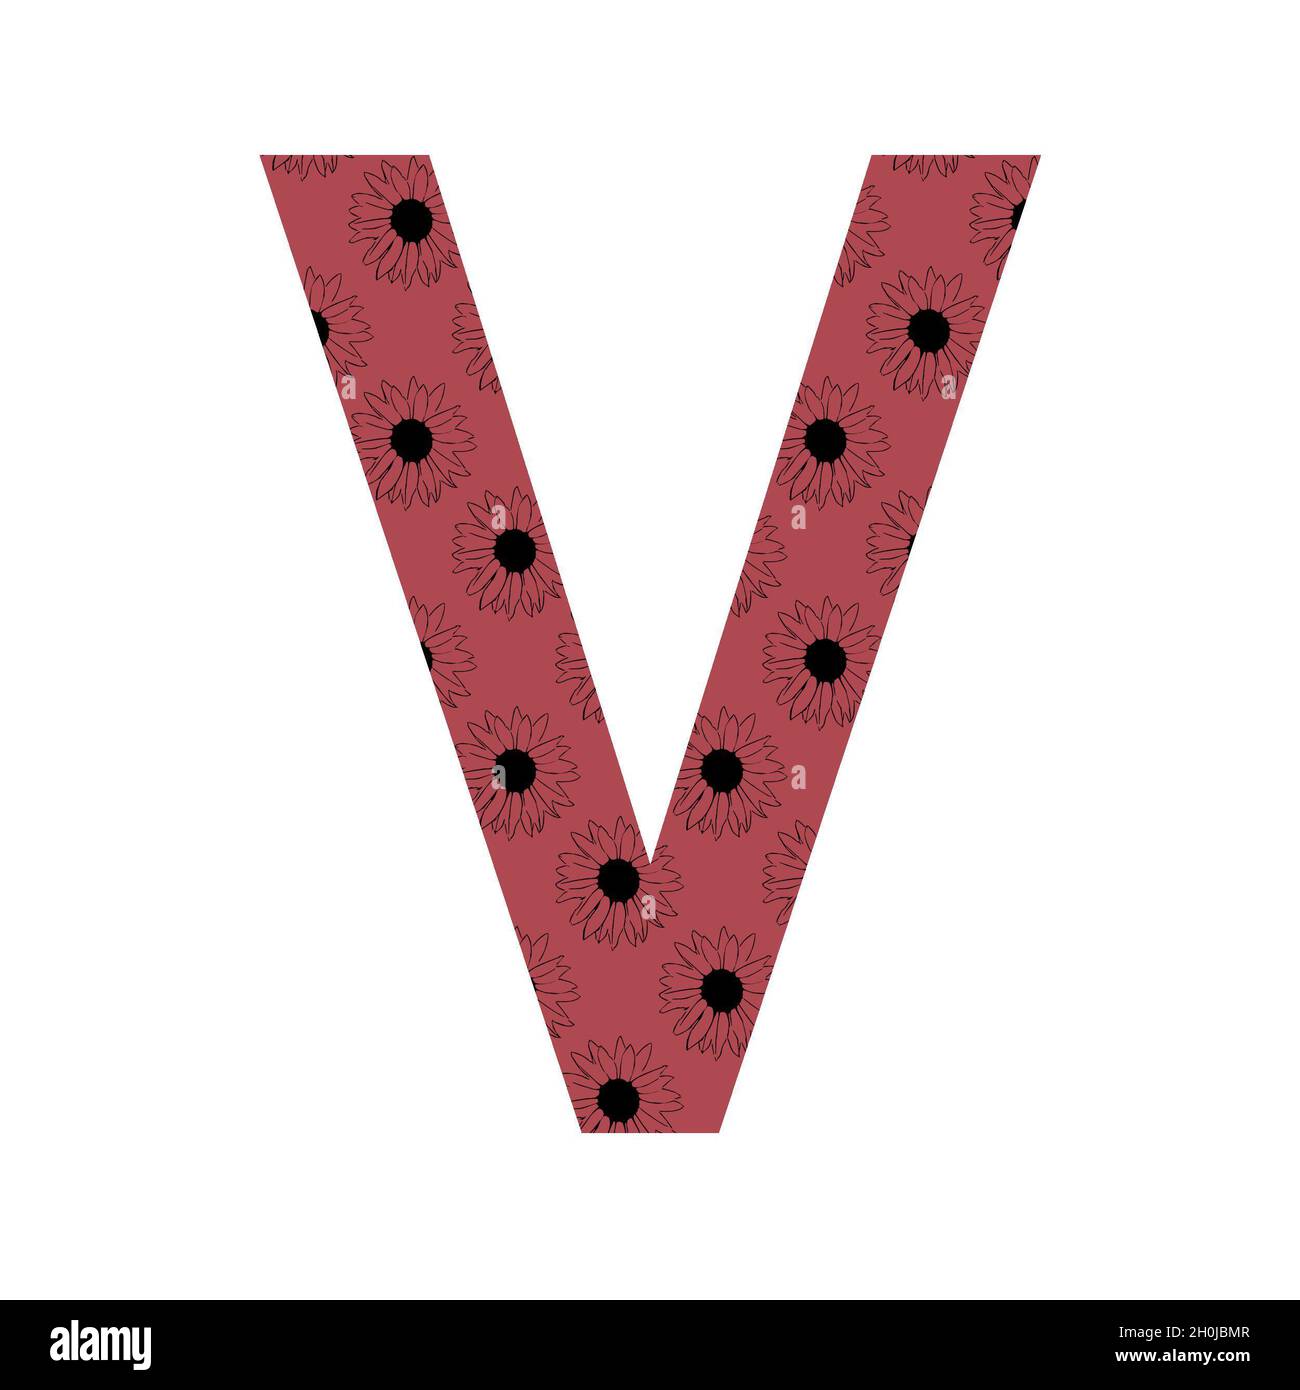 Letter V of the alphabet made with a pattern of sunflowers with a dark pink background, isolated on a white background Stock Photo